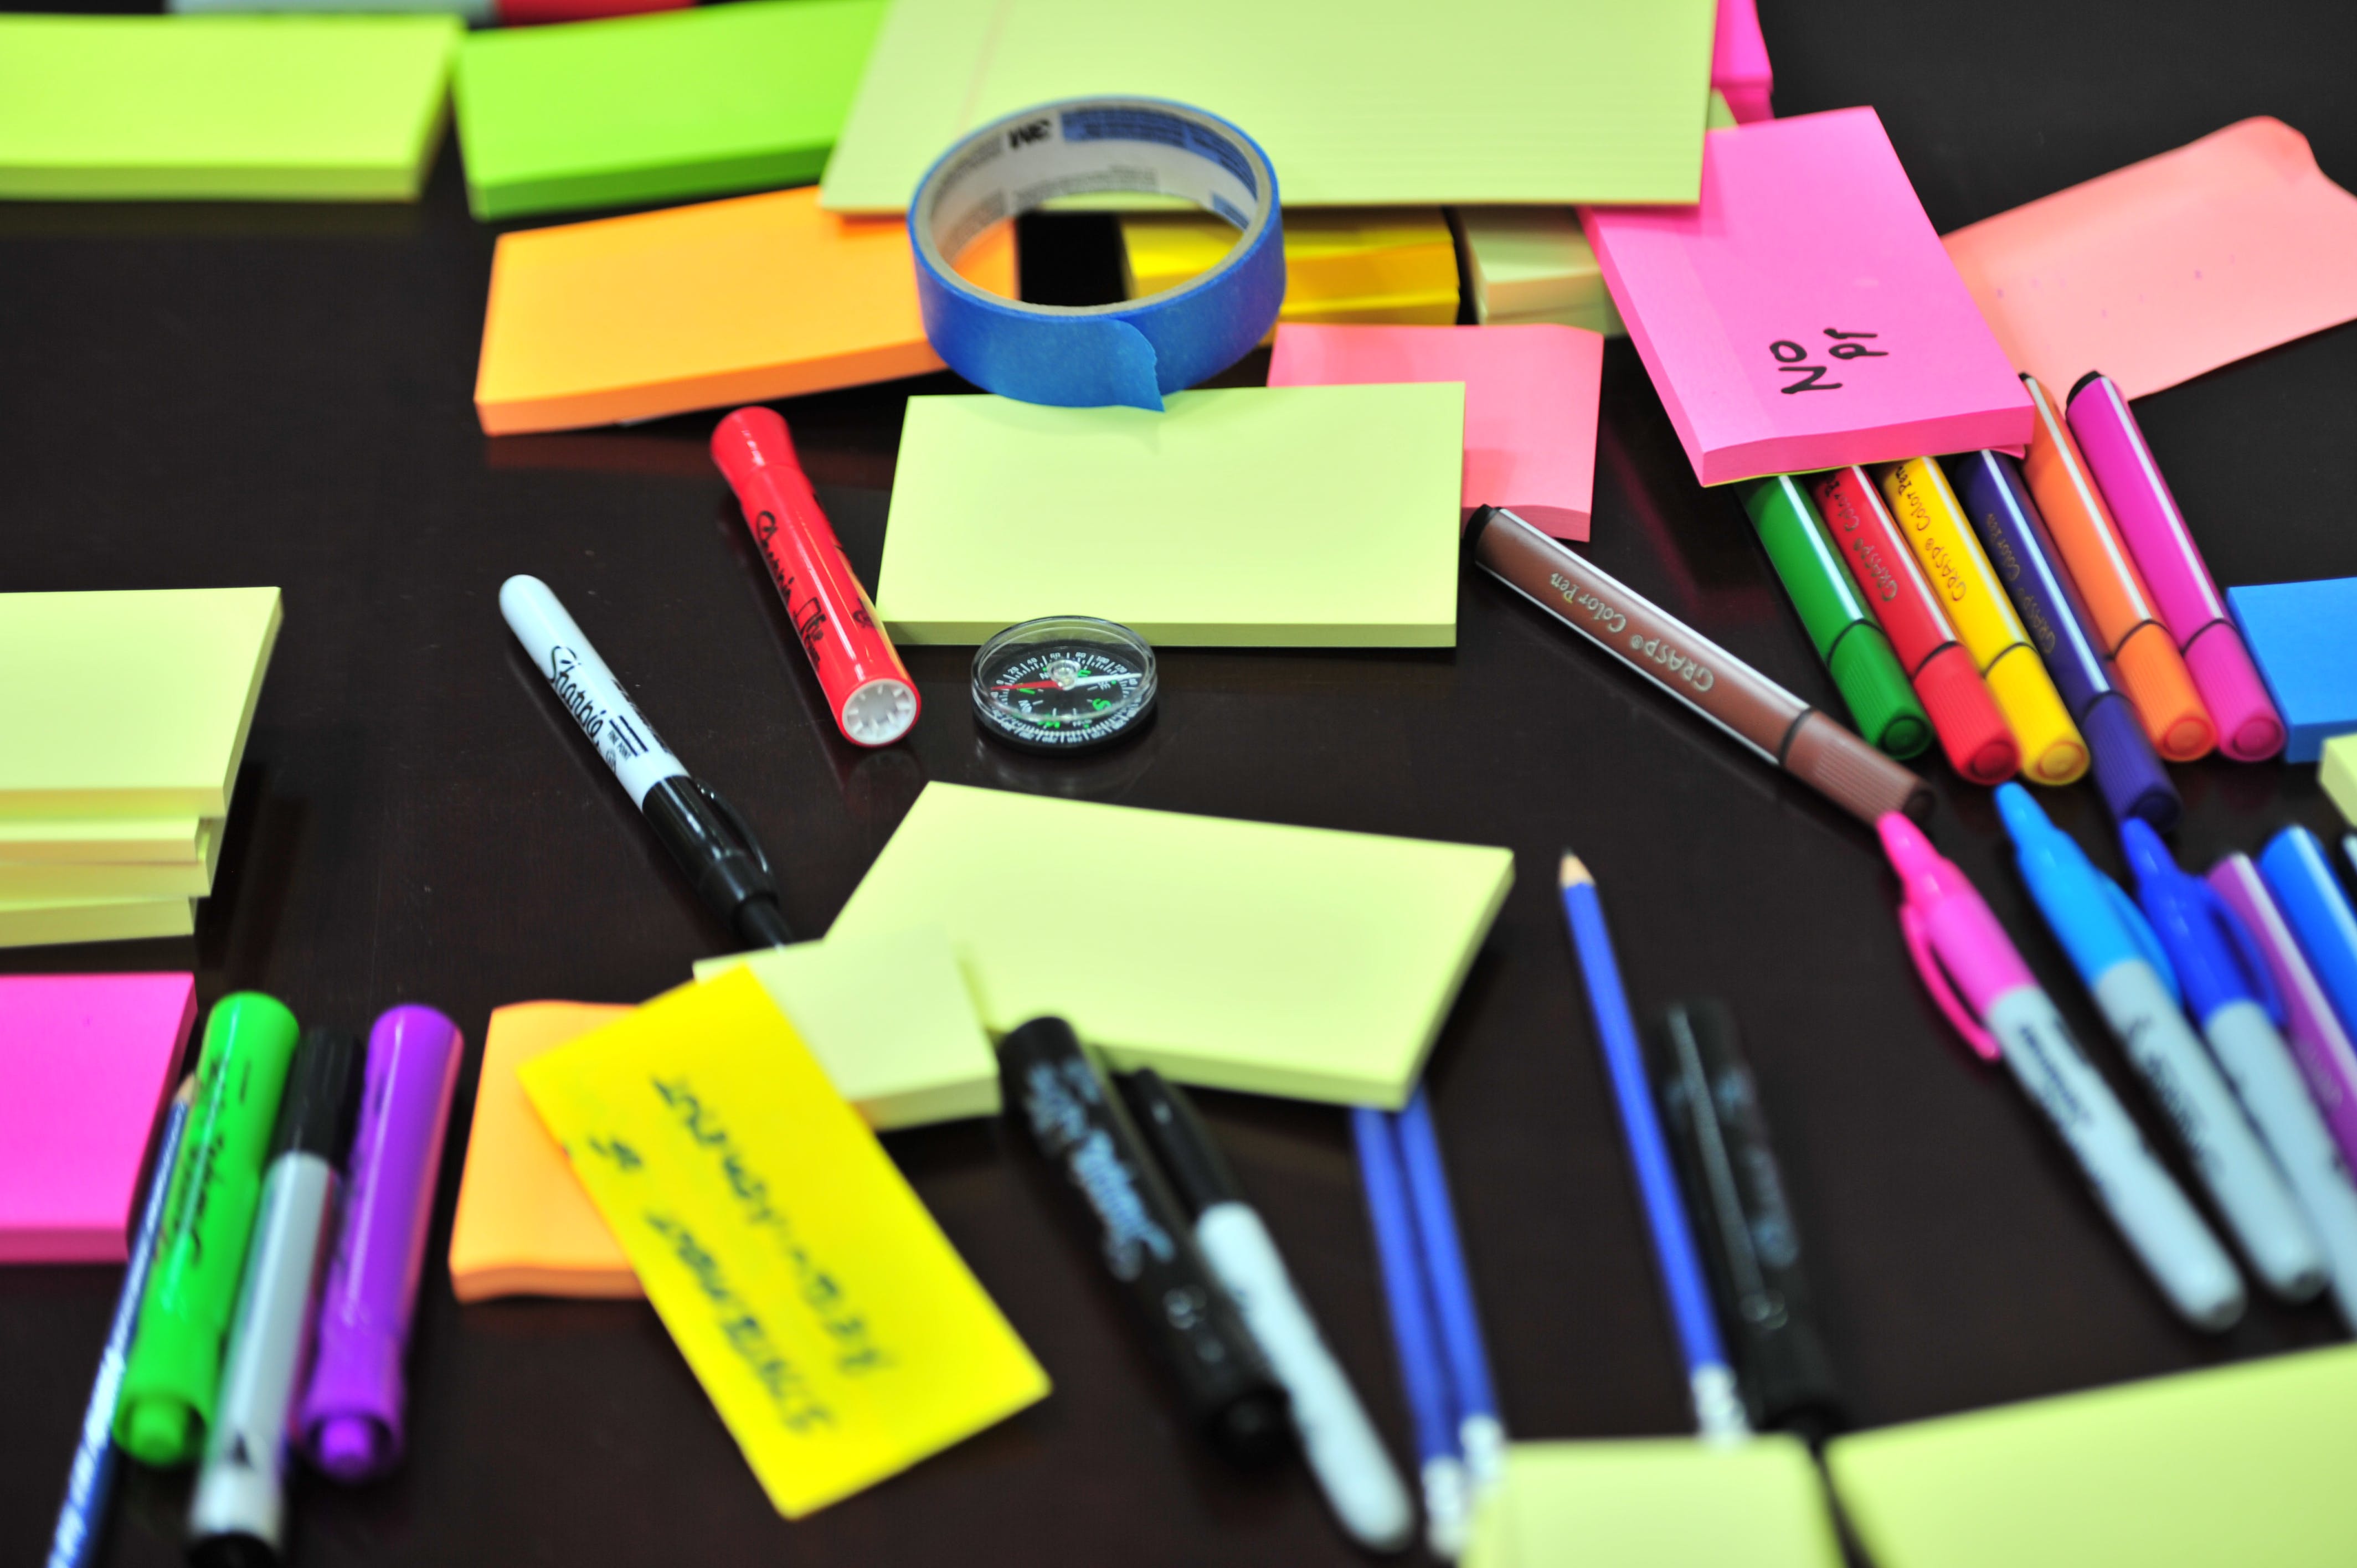 Colored sticky notes, pens, and markers used to keep organization in academic writing